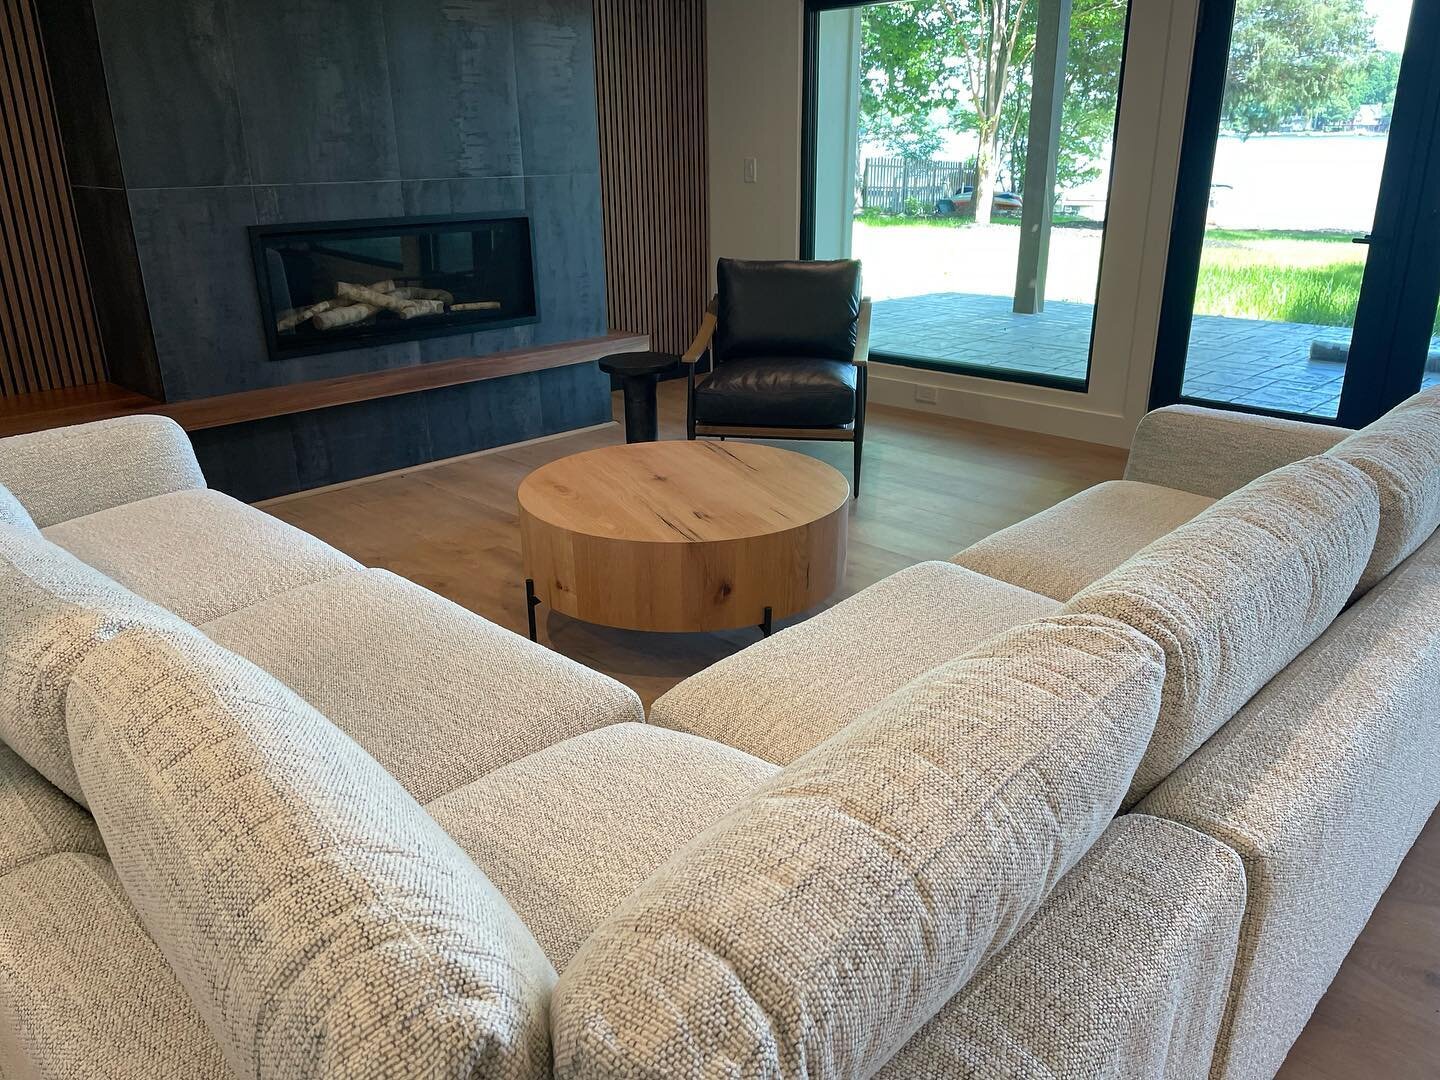 Furniture is all coming together nicely for our Lake Norman clients in this install day! Love this angle right here!😍

Interior designs by @homestylesdesign 
~~~~~~~~~~~~~~~~~~~~~~~~~~~~

Homestyles Interior Design
📱704-906-7469
📧 Wendy@Homestyles